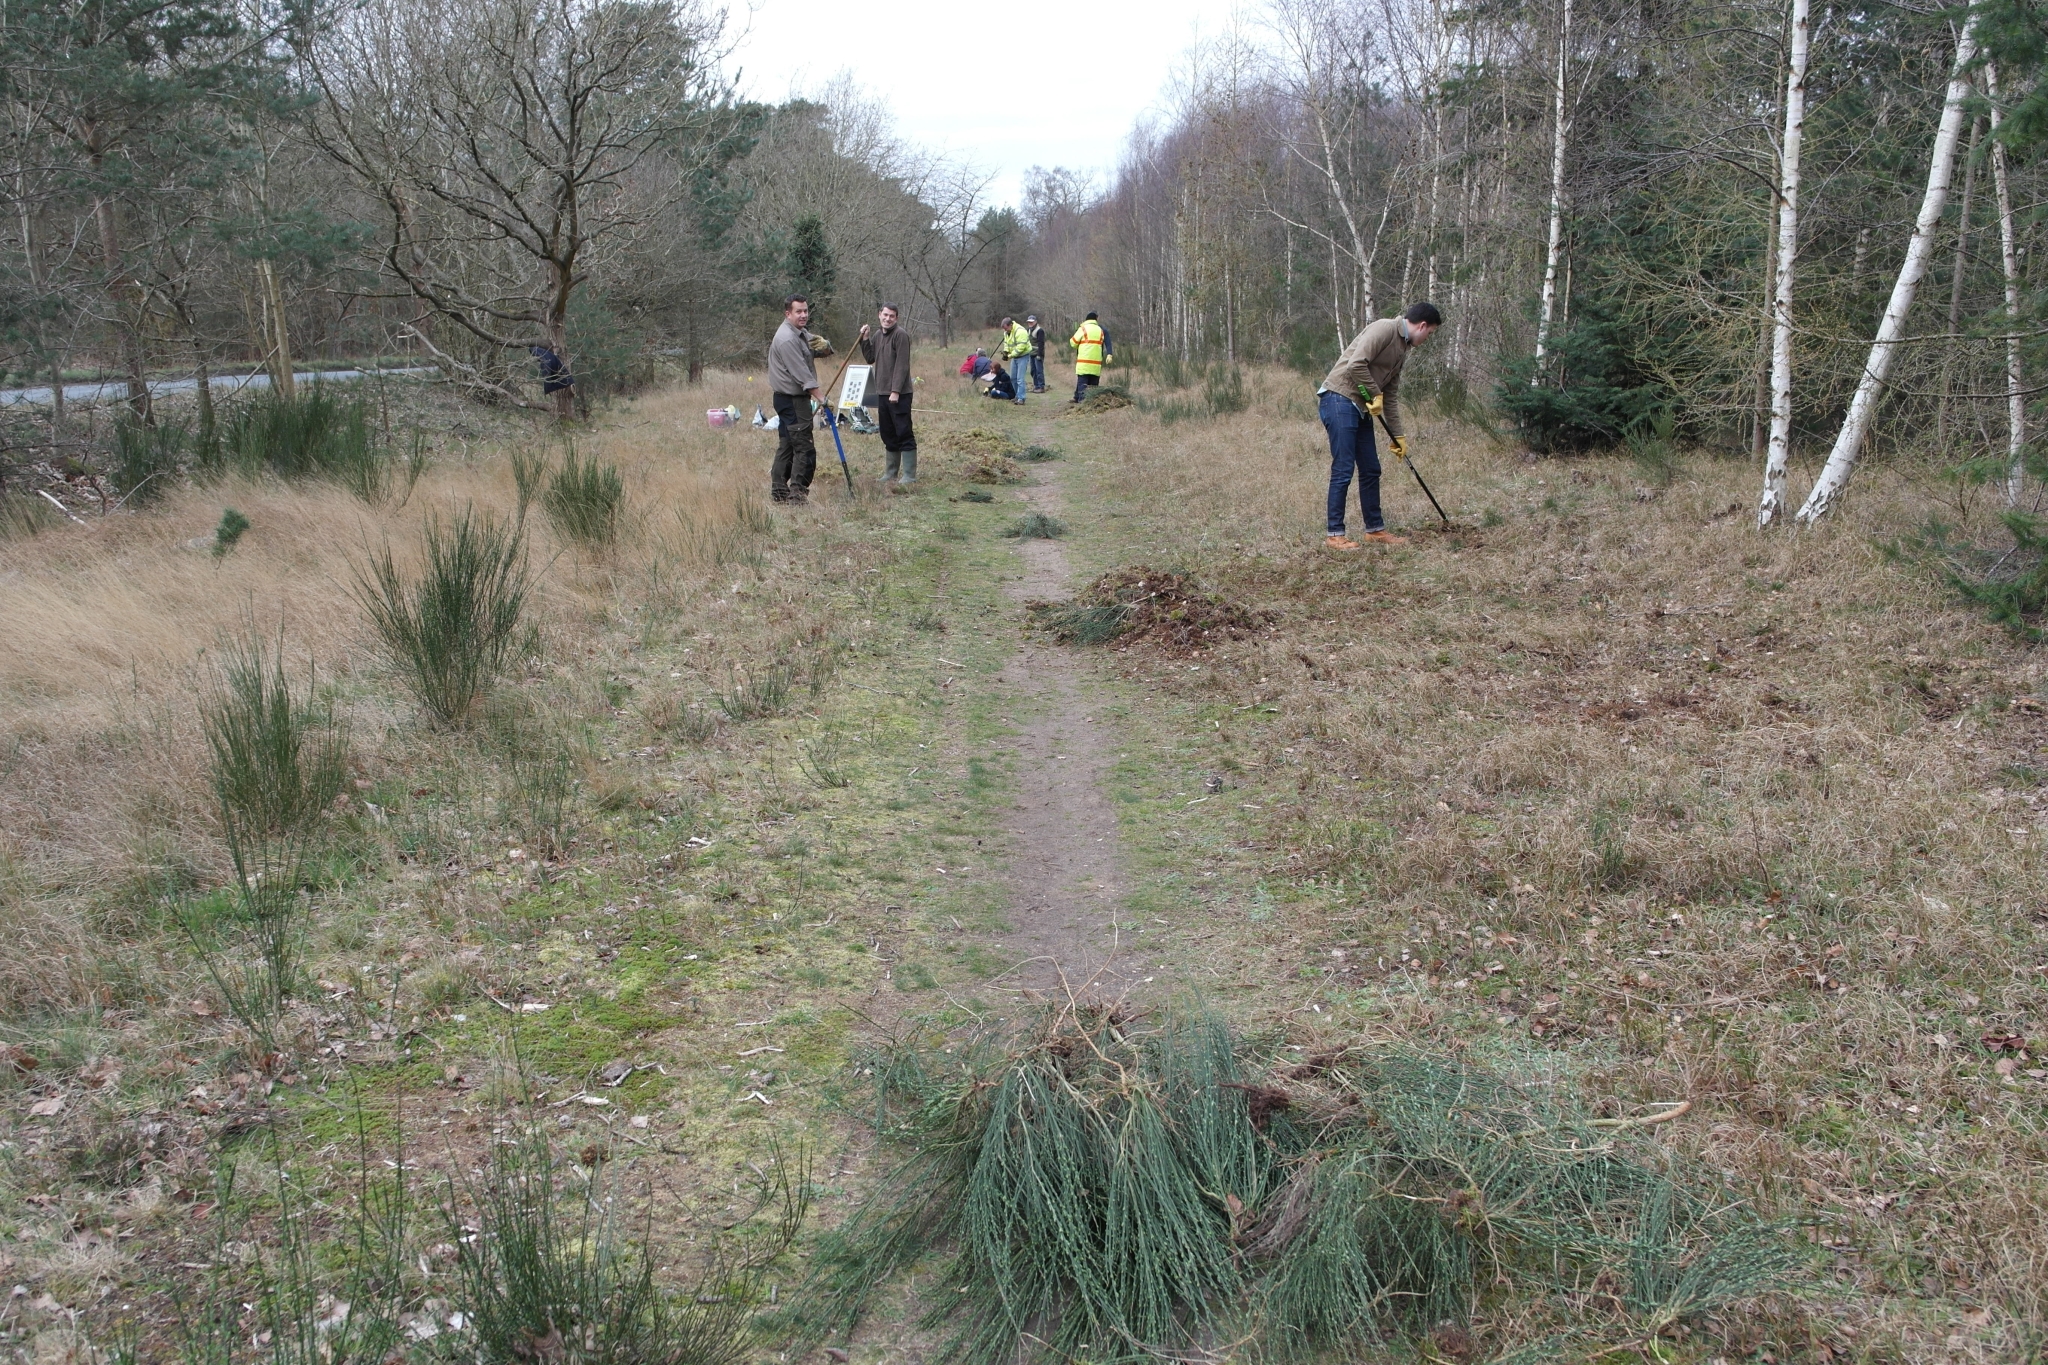 A photo from the FoTF Conservation Event - March 2020 - Habitat Improvement at Quakers Walk, Mildenhall Woods : Volunteers at work improving the habitat